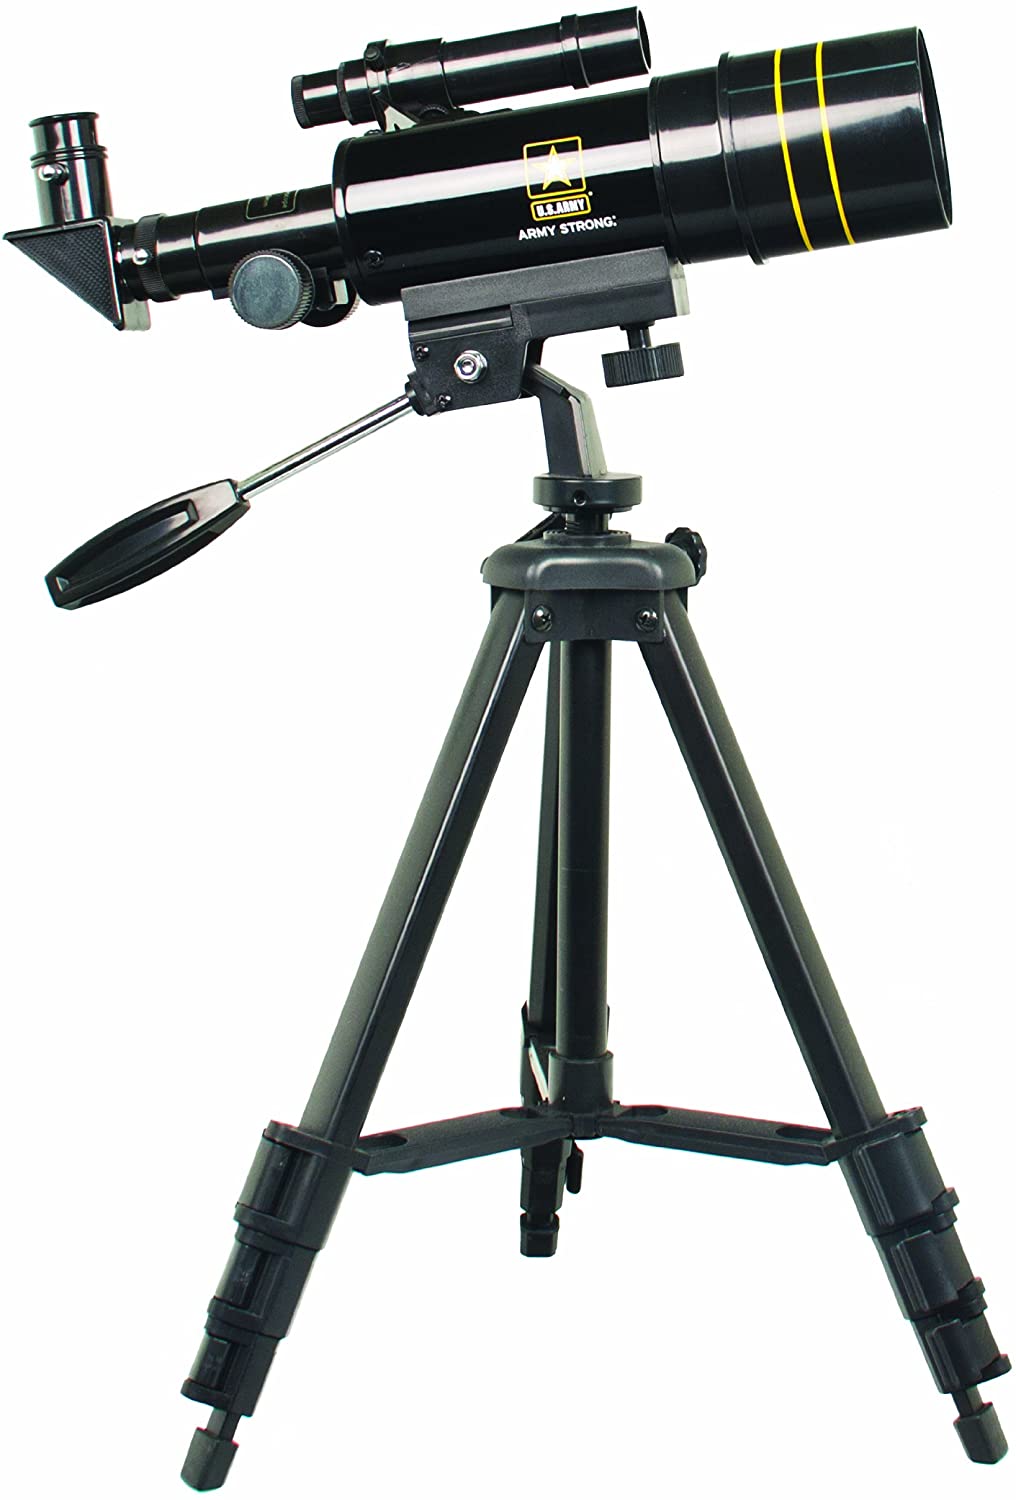 U.S. Army US-TF30060 Refractor Telescope 300x60 (Black) | Decor Gifts and More